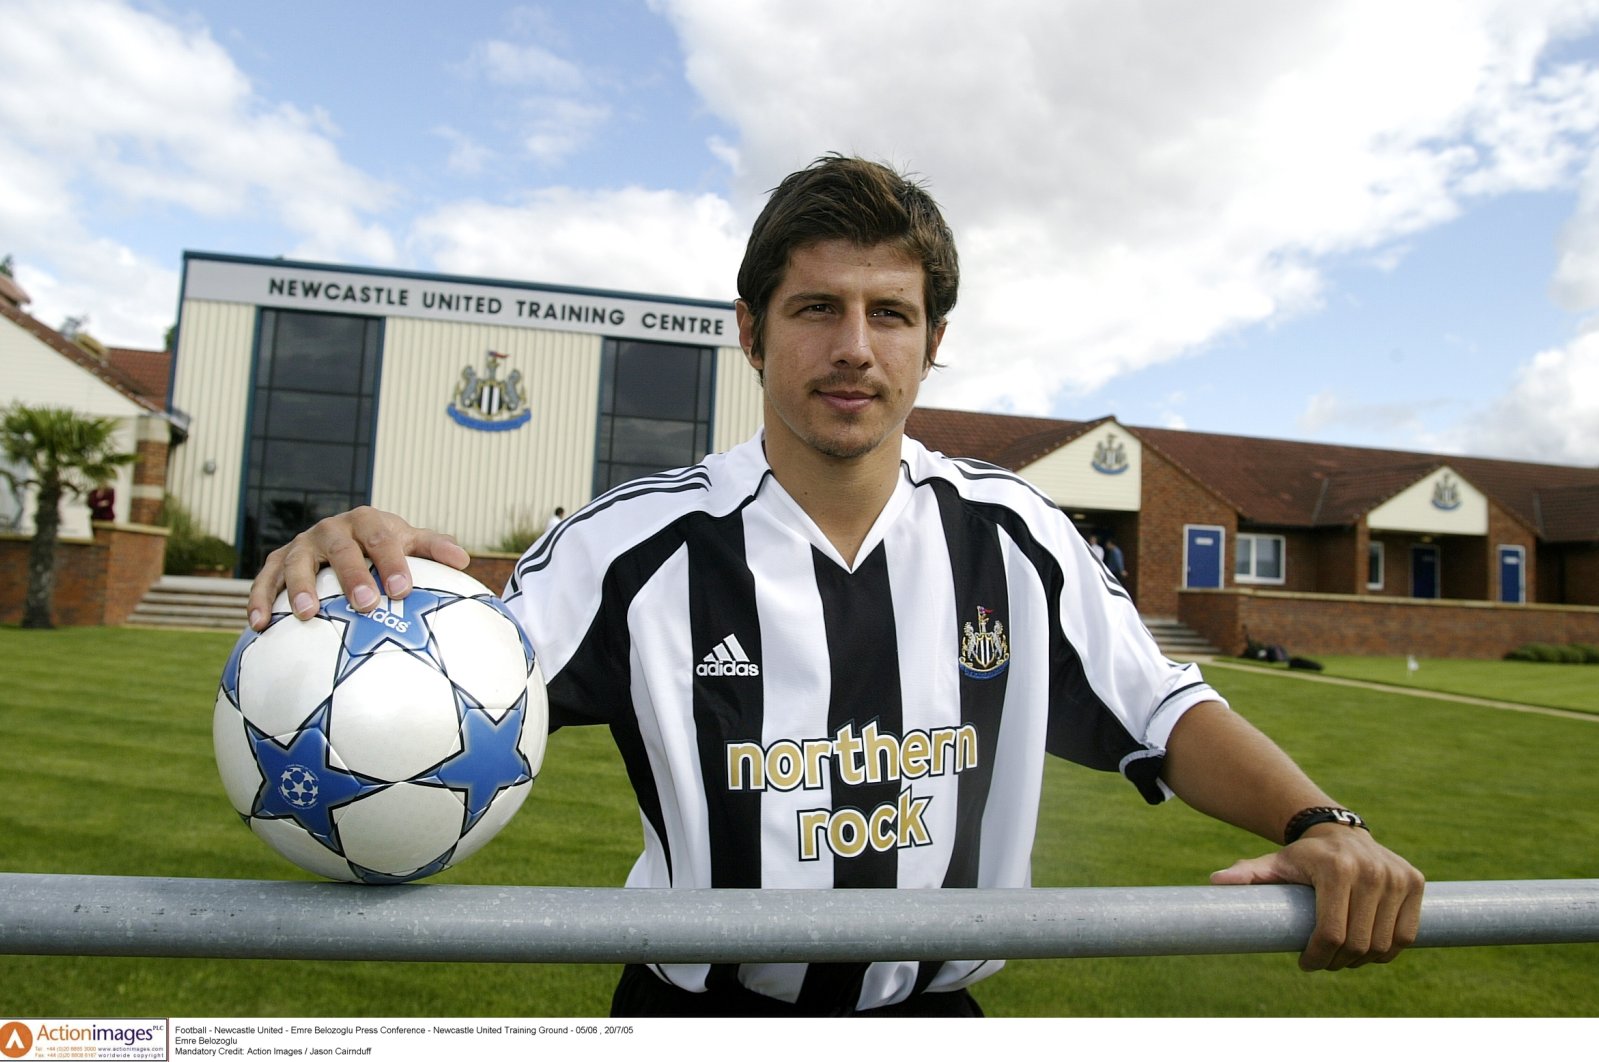 Newcastle United's then-new signing Emre Belözoğlu poses for a photo during a press conference at the Newcastle United Training Ground, England, July 20, 2005. (Action Images/Jason Cairnduff via Reuters)